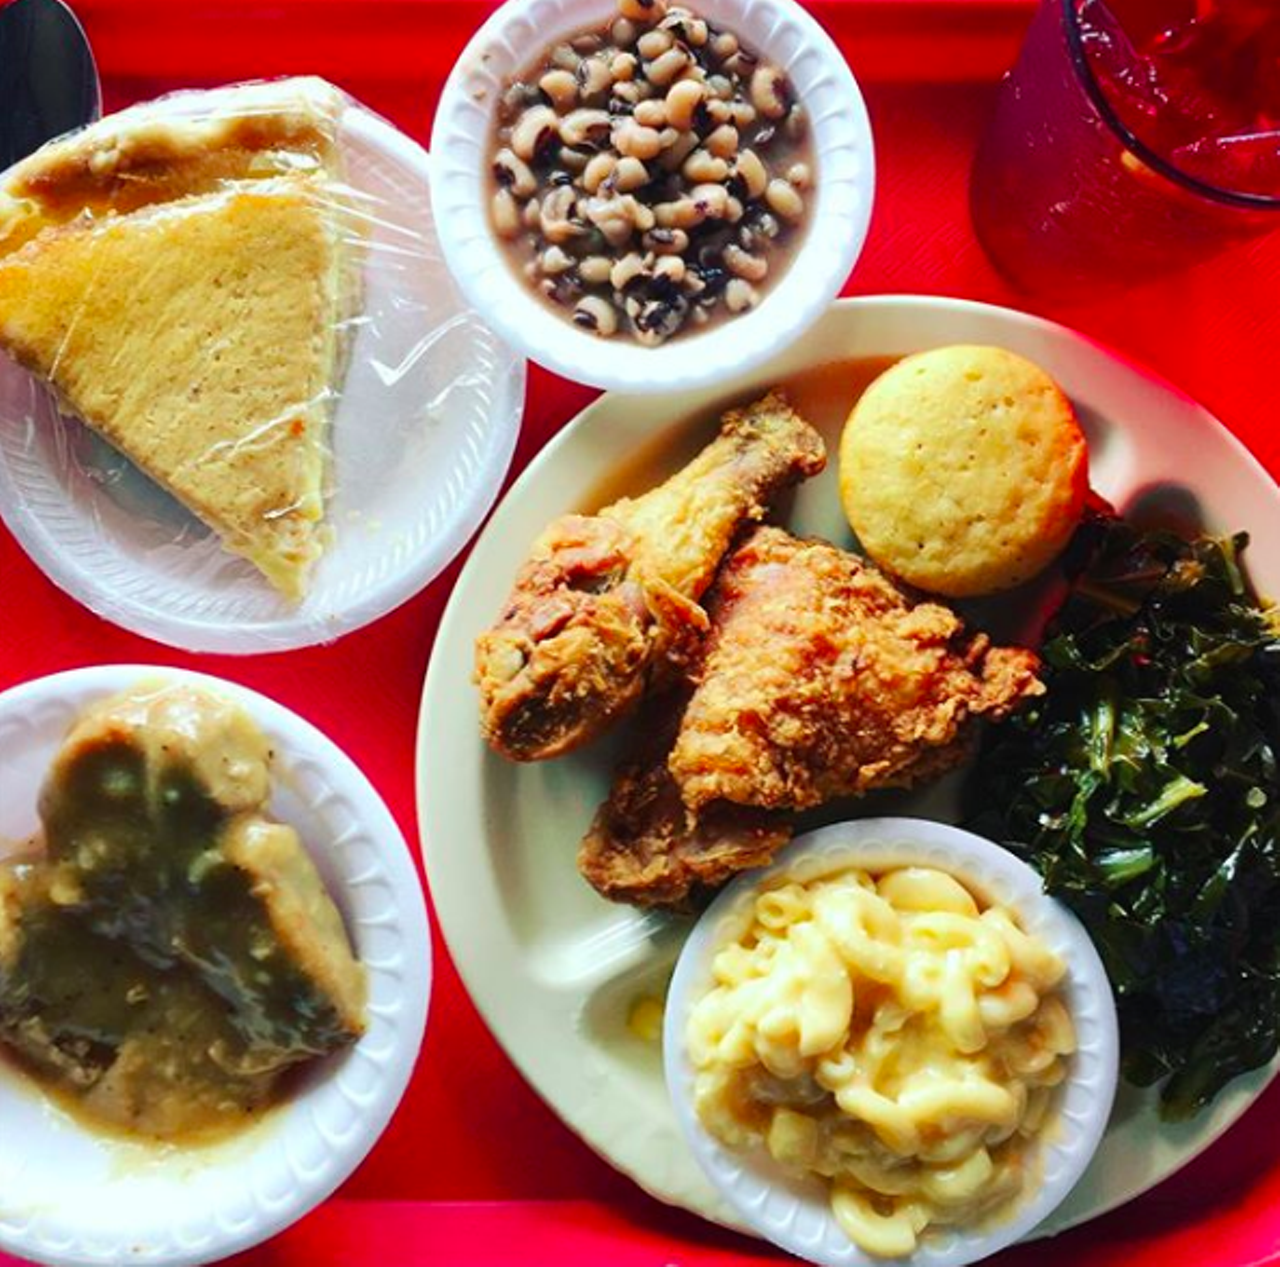 When Mr. & Mrs. G say homecooking, they’re not playing around. Prized for its freshly-made desserts (every morning!) and straight-up soul food, this spot will have you feeling more than good. Those on a diet, beware: this isn’t the place for you. Leave it to us foodies.
Photo via Instagram / pjstephen